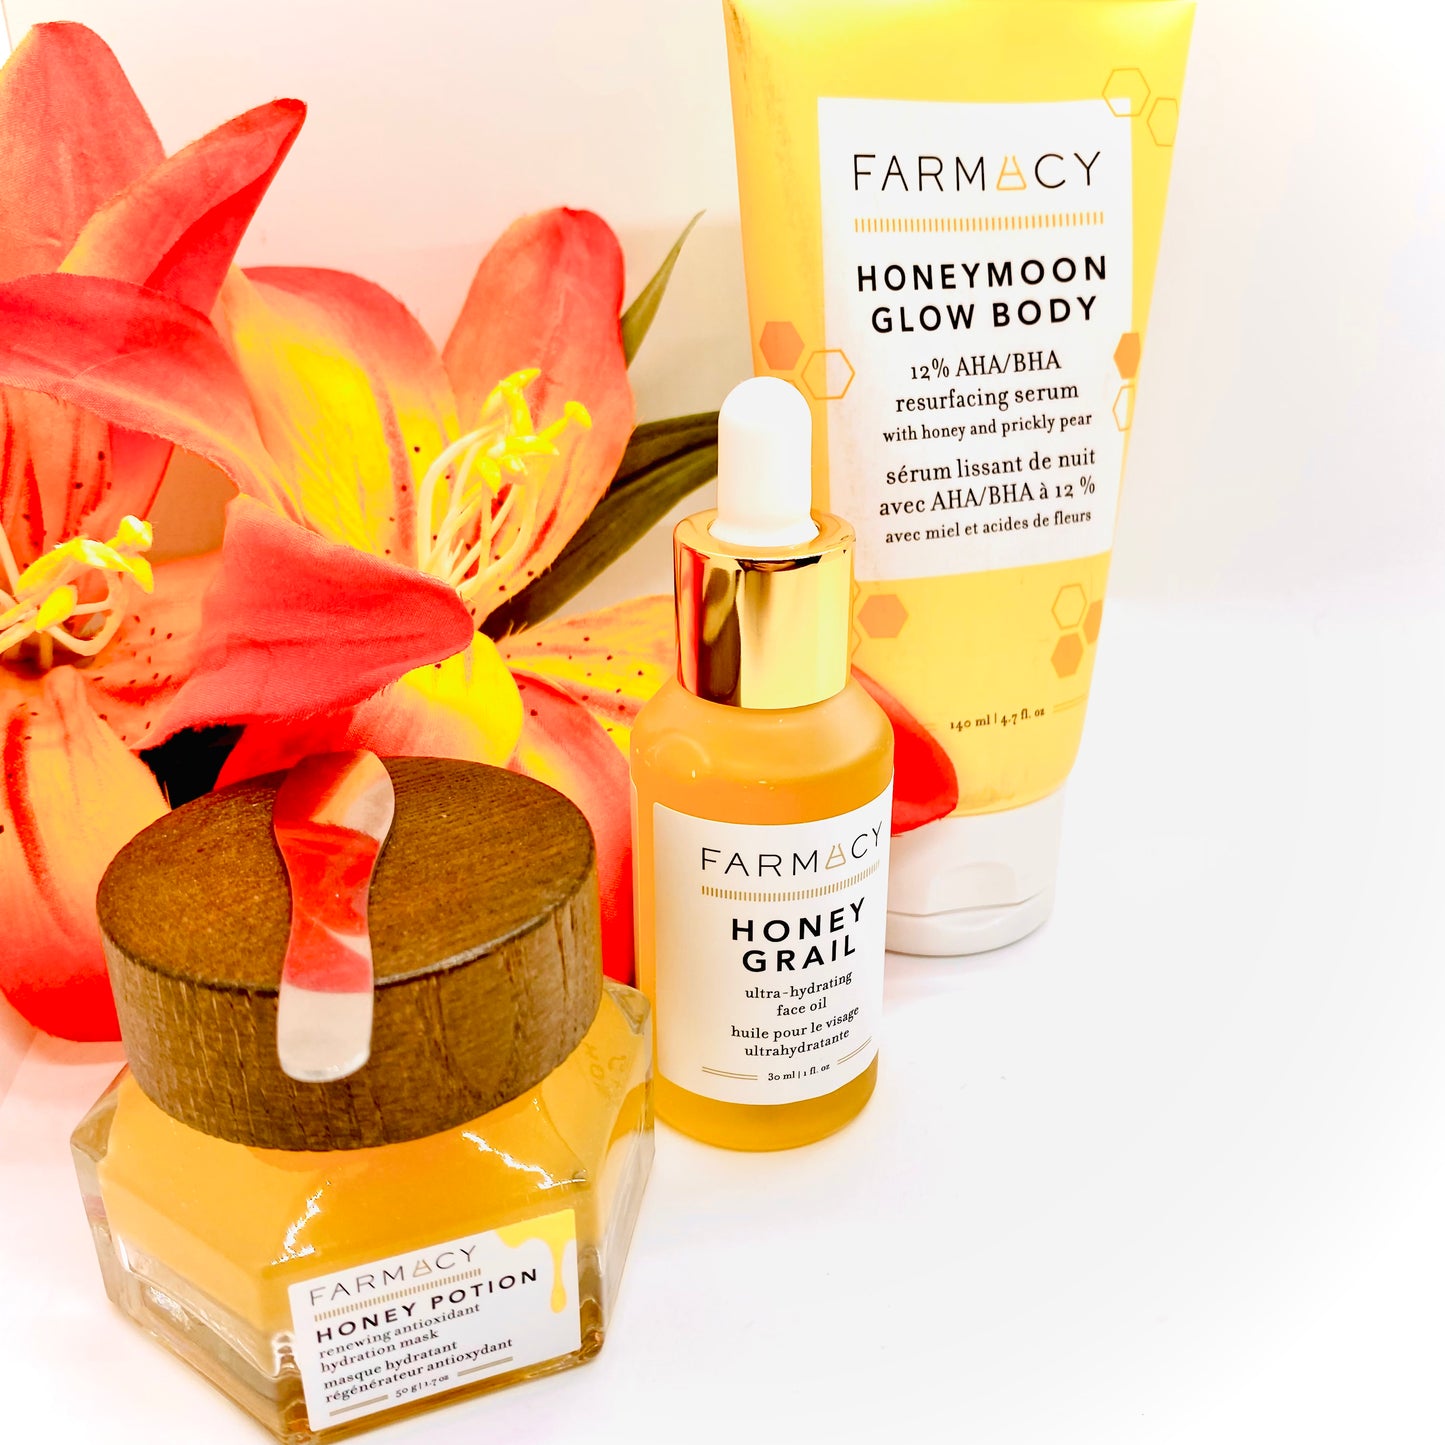 Farmacy Honeymoom Glow 3 piece Anti aging power Bundle which includes one fullsize cleanser, one full siz honey grail ultra hydrating face oul and last but not least, one super anti aging Night and day Moisturizer- All products have been curated specifically for Facetreasures Boutique and sister sites and you will jot find this set or bundle anywhere else except here at facetreasures.com